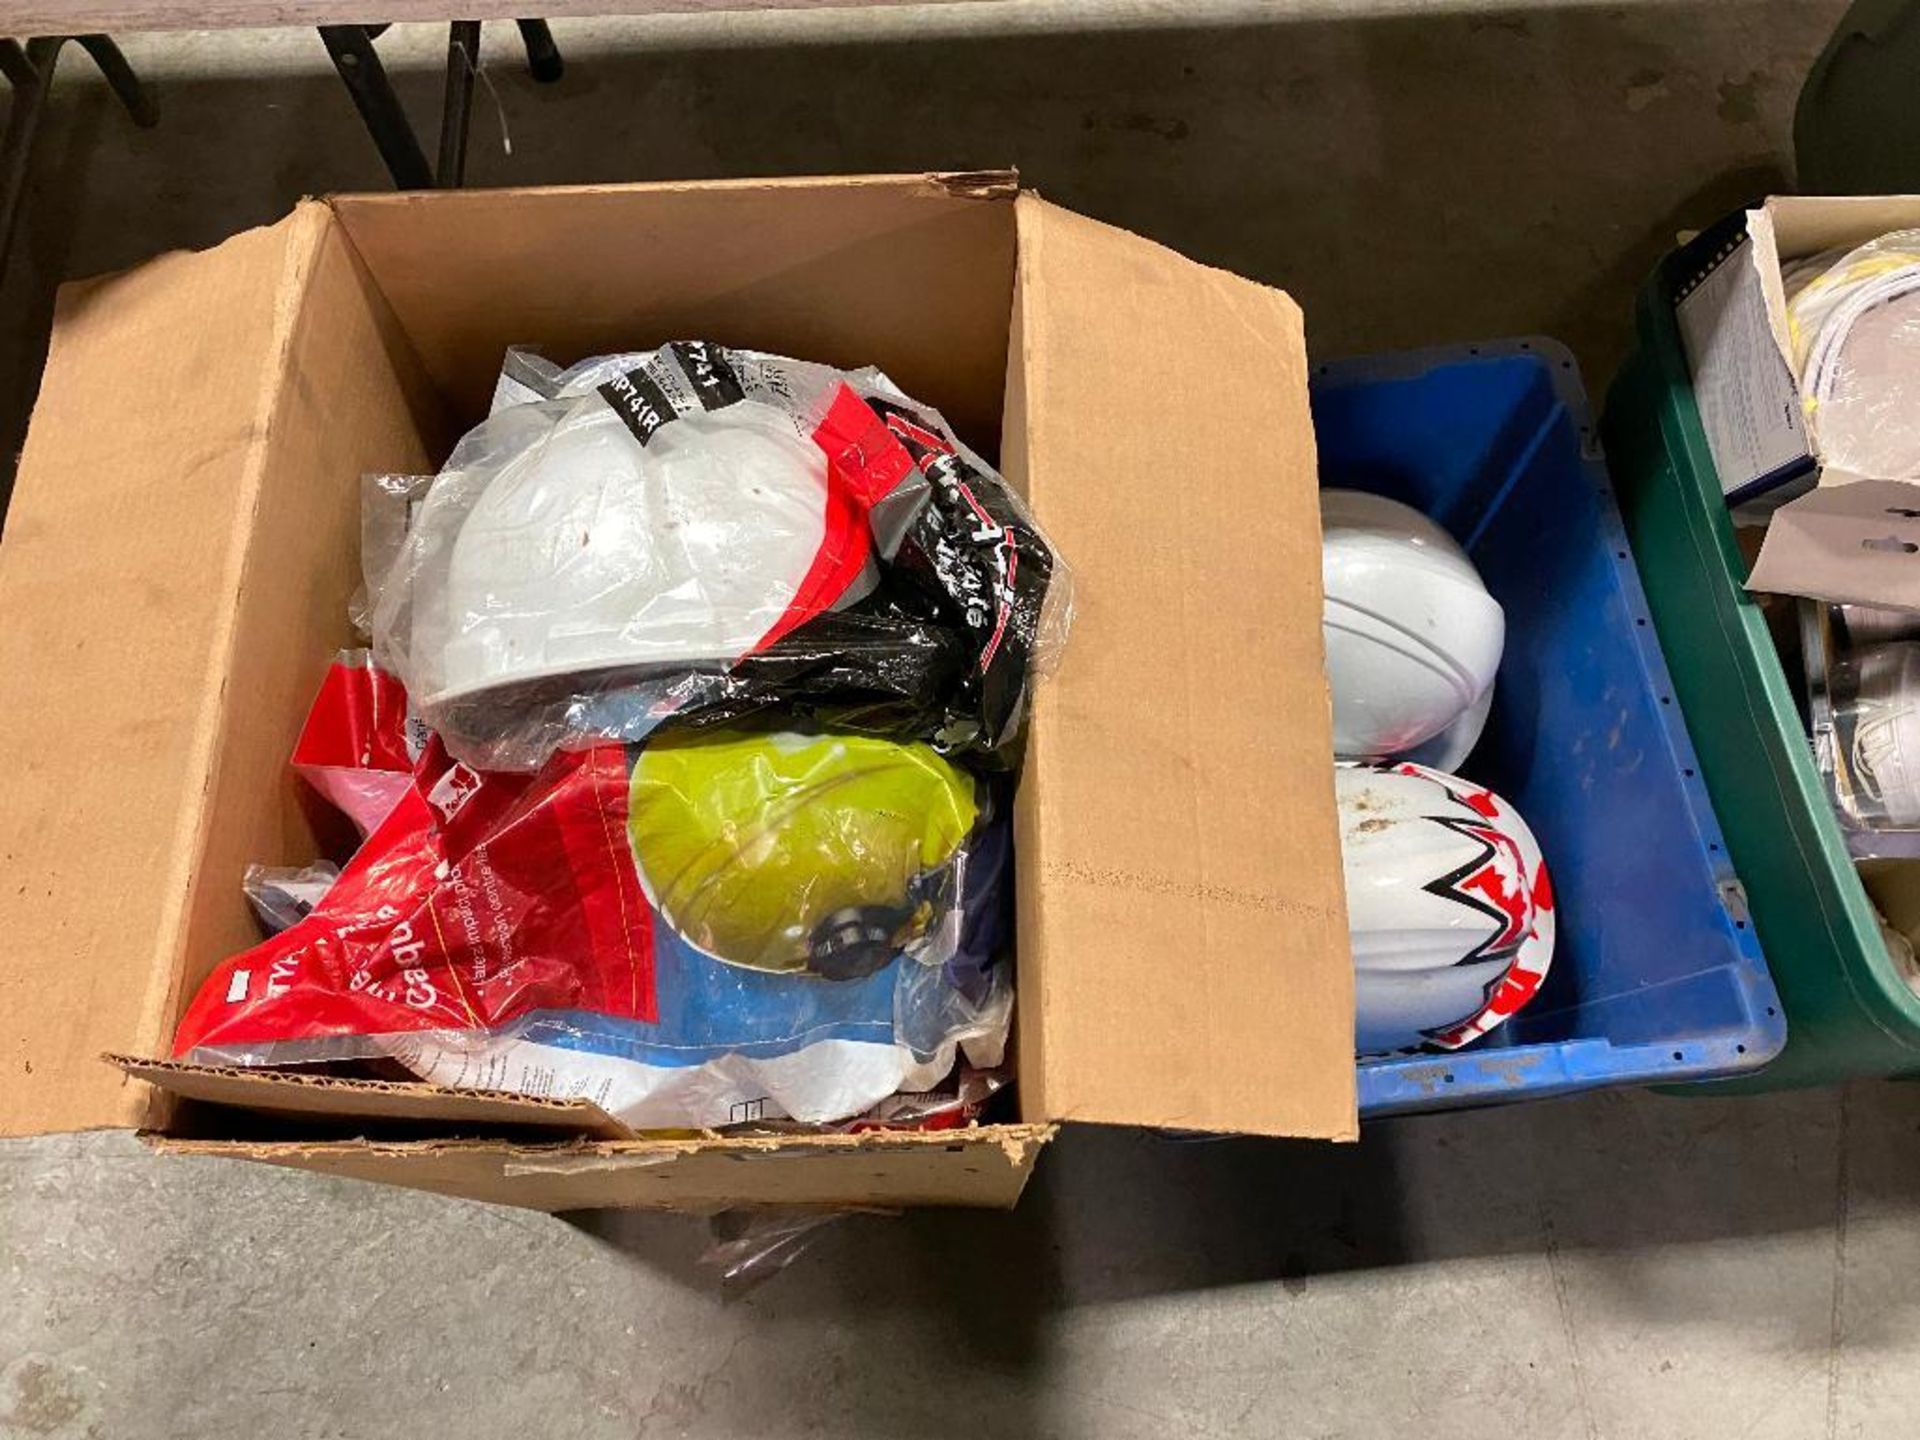 Lot of (5) boxes of safety equipment; hard hats, masks, safety glasses, etc. - Image 2 of 4